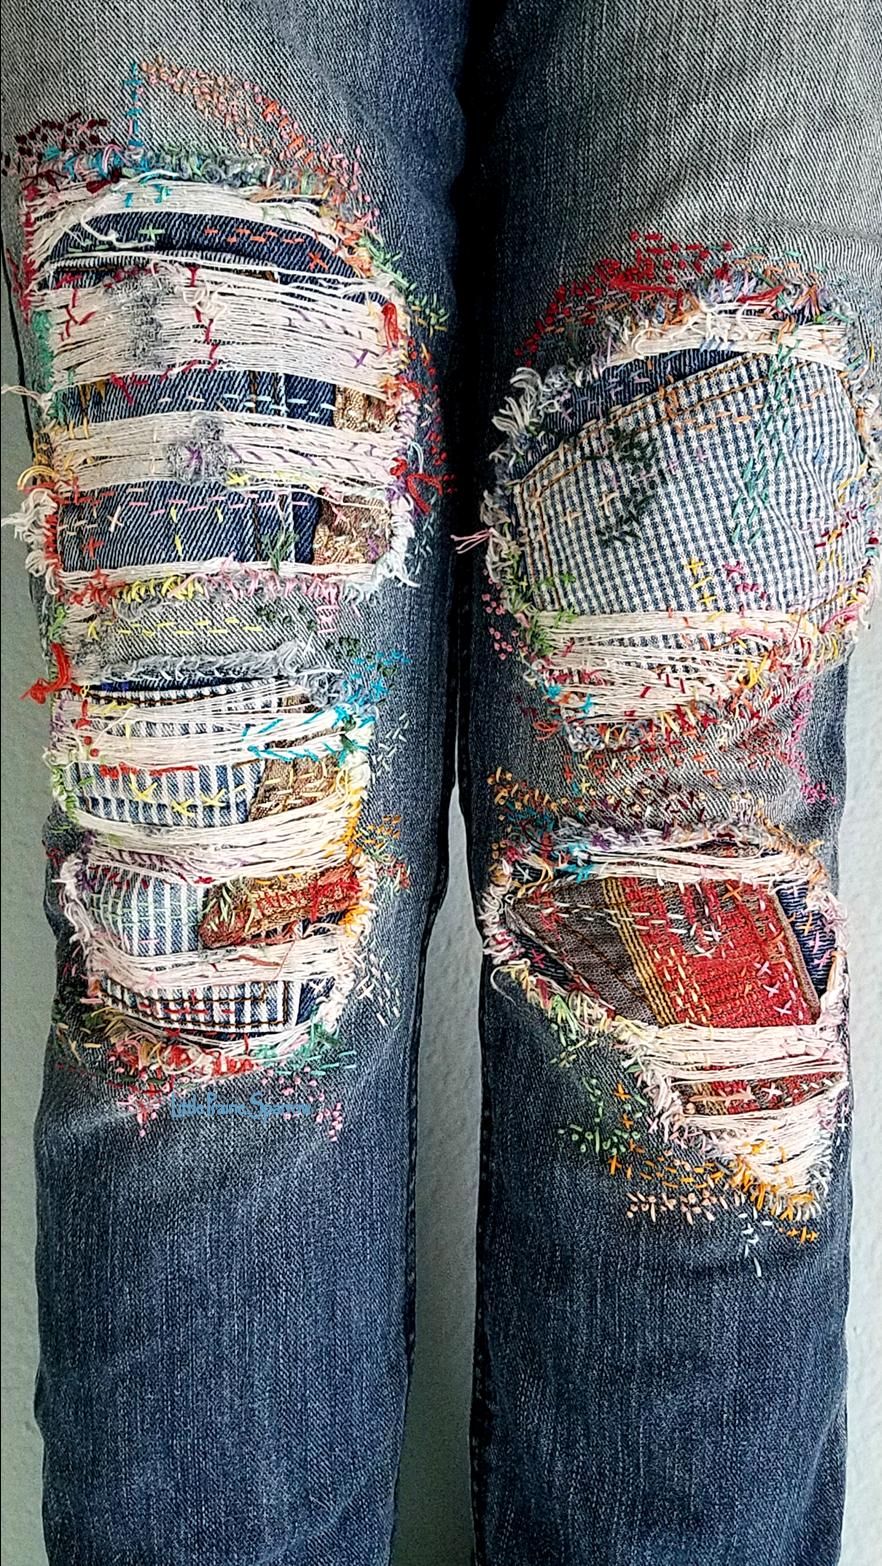 Boro embroidery patched jeans, distress girlfriend jeans, patchwork denim